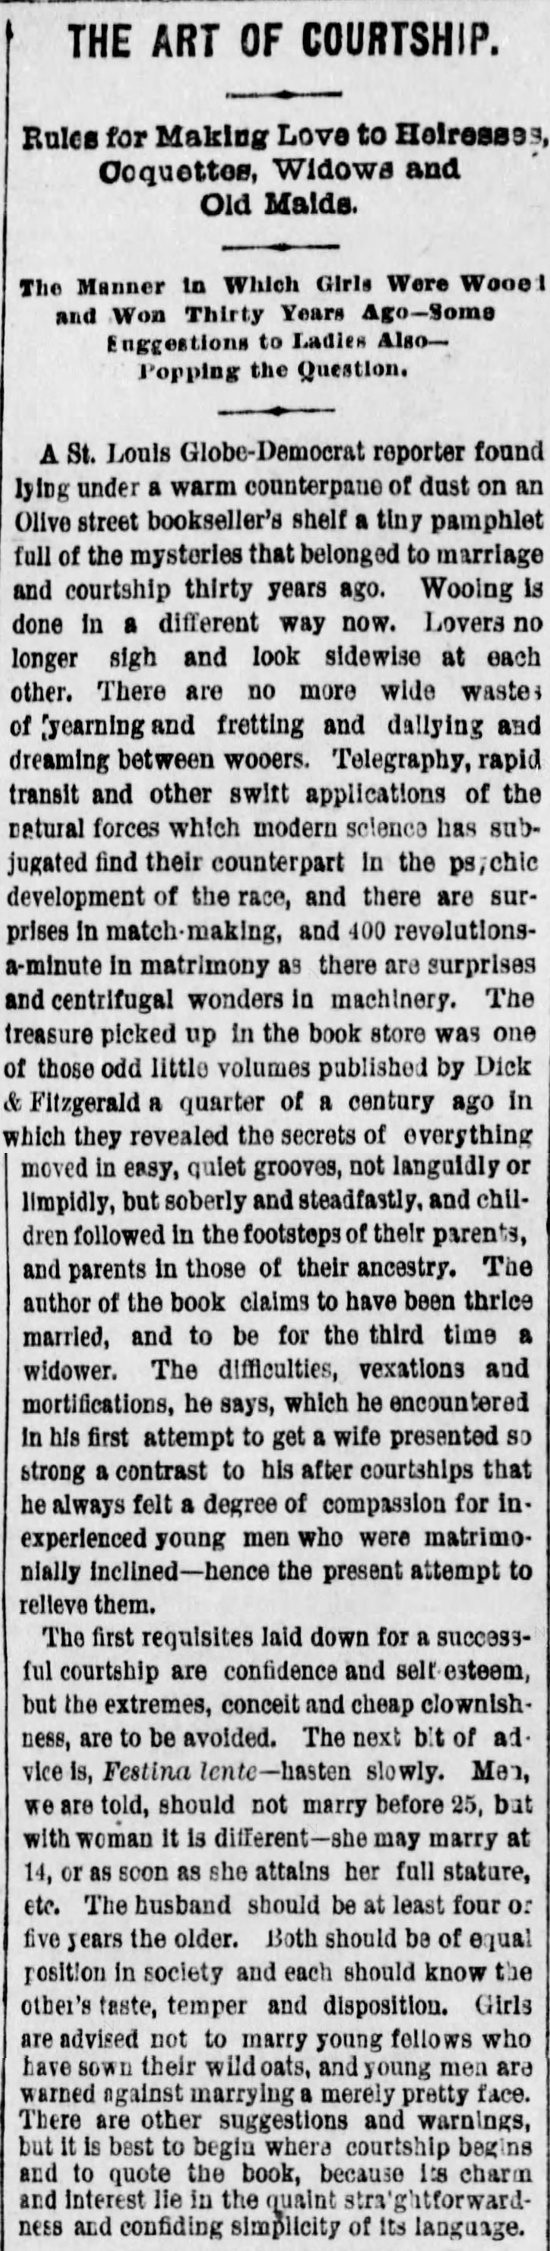 Kristin Holt | The Art of Courtship, Introduction, from The Des Moines Register of Des Moines, IA on February 20, 1887